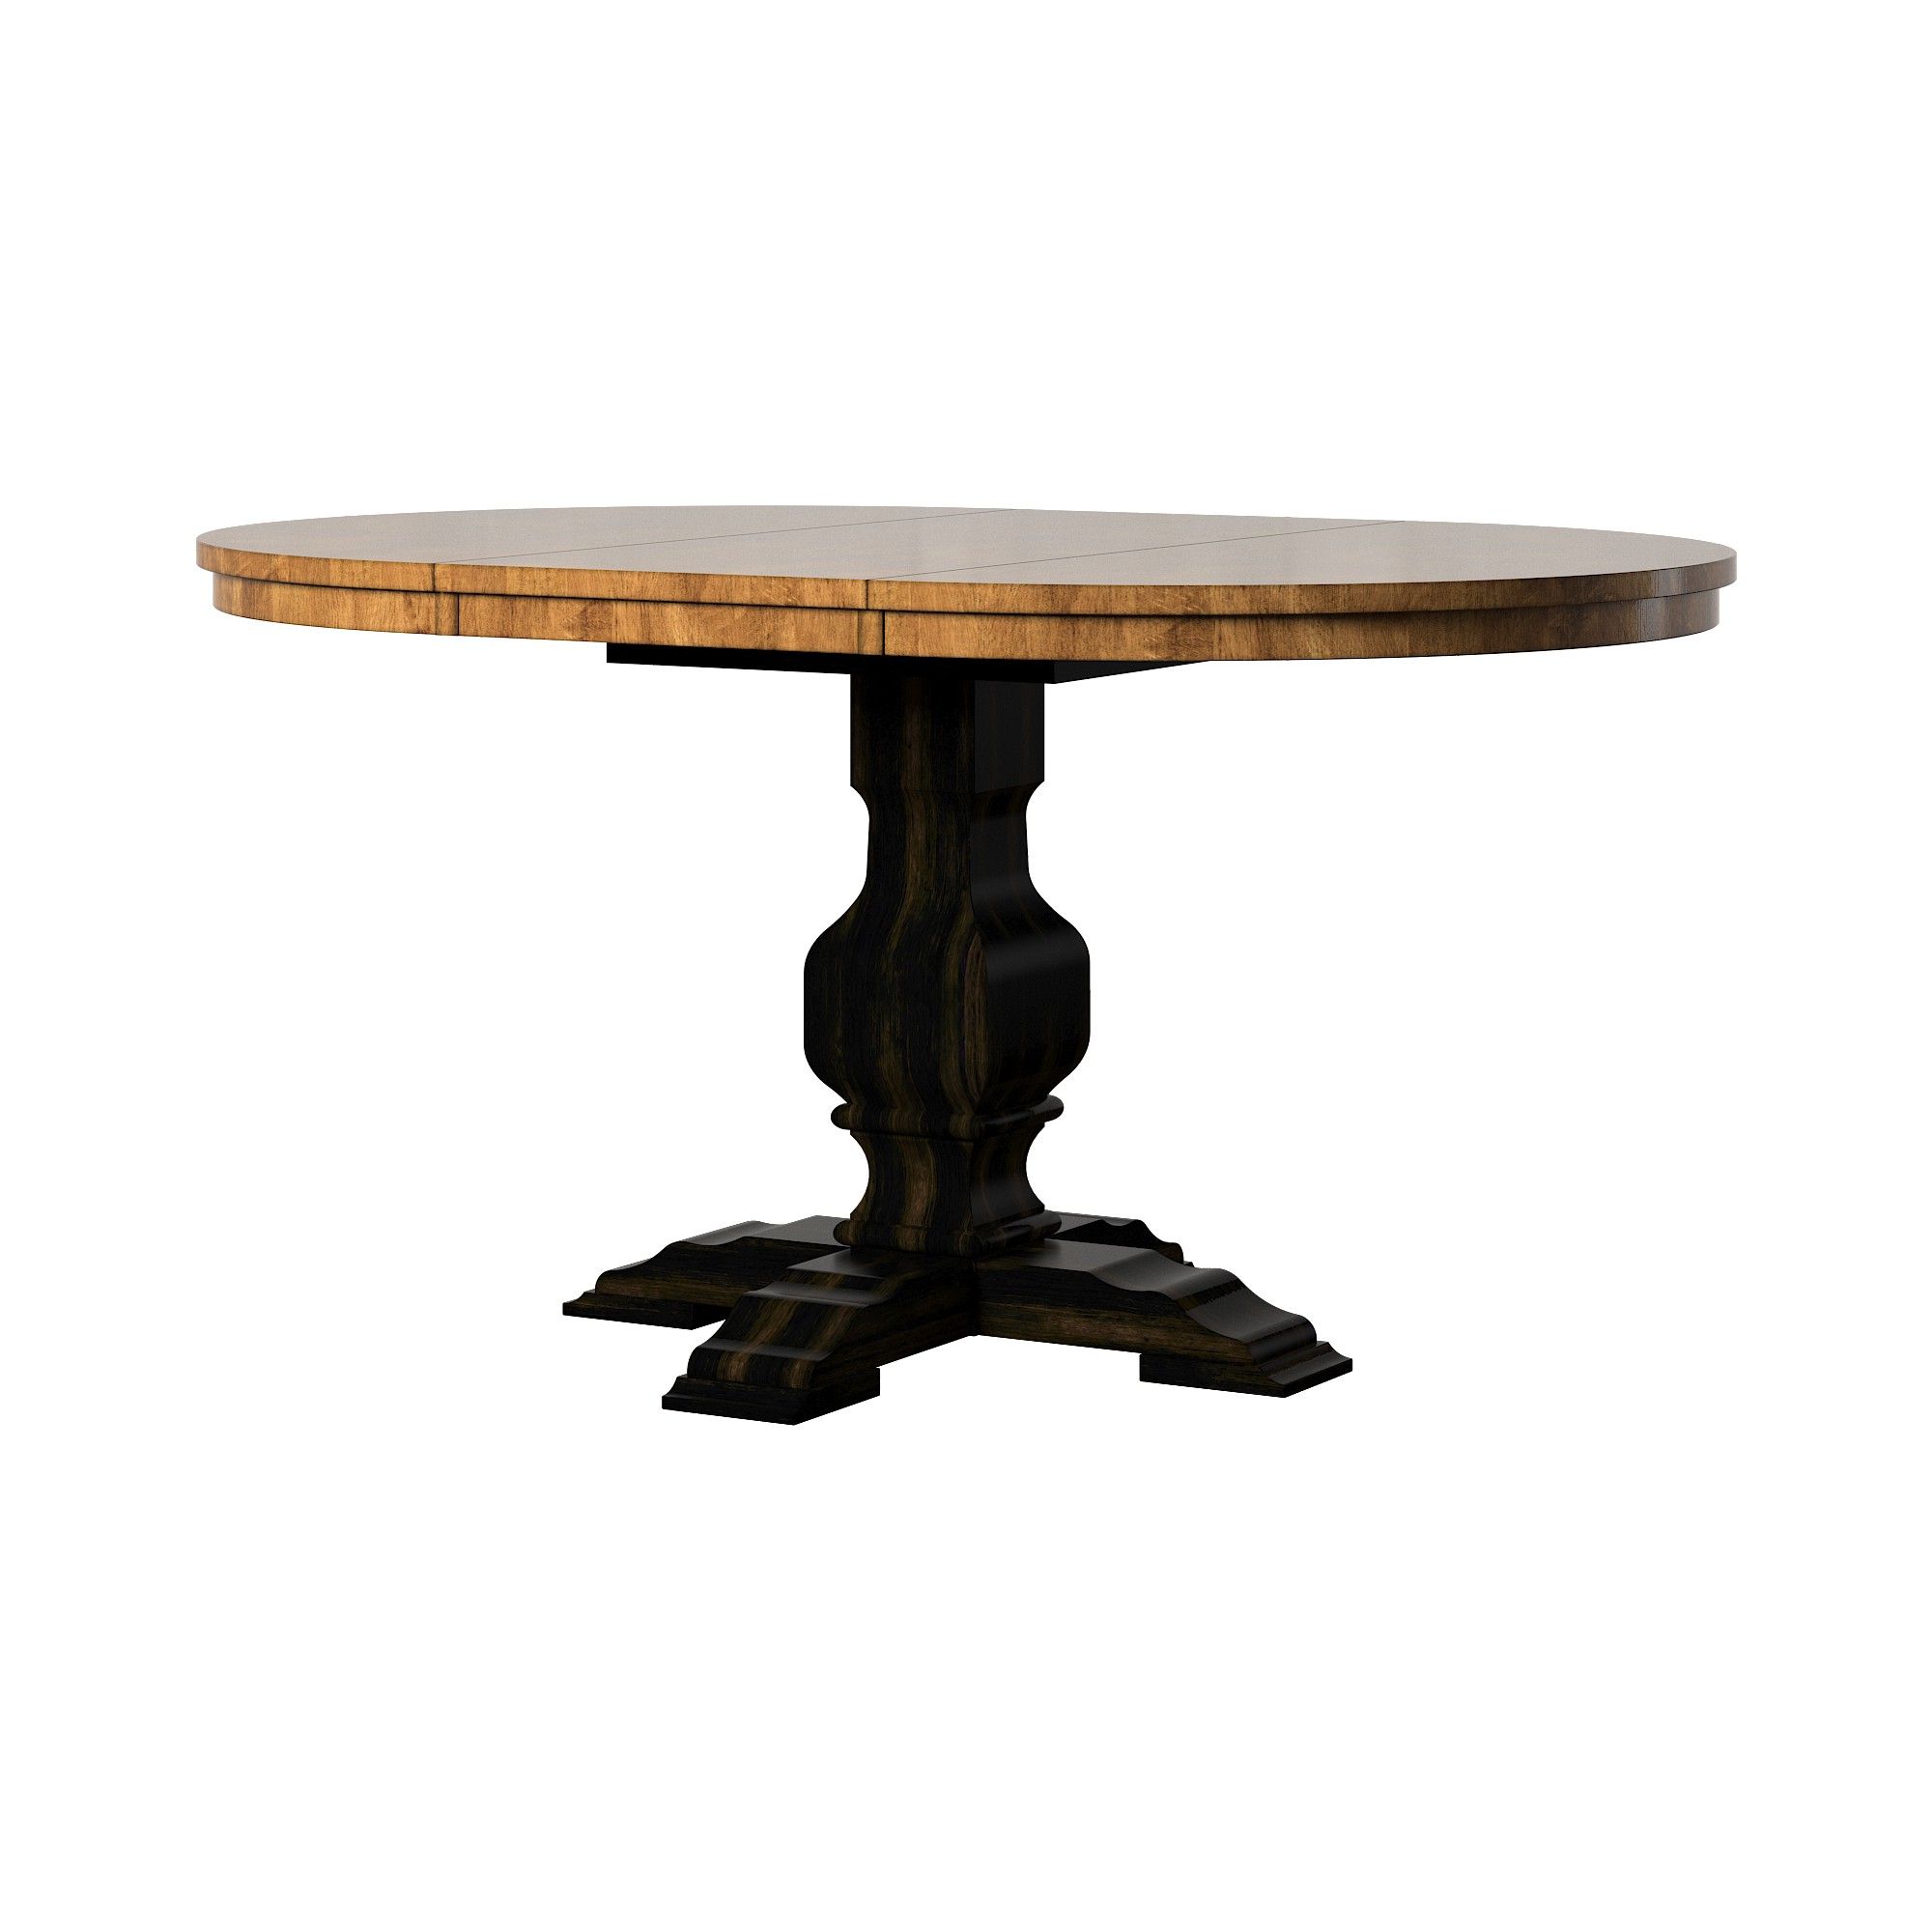 South Hill Oval Extendable Pedestal Base Dining Table Pertaining To Most Up To Date Driftwood White Hart Reclaimed Pedestal Extending Dining Tables (View 8 of 25)